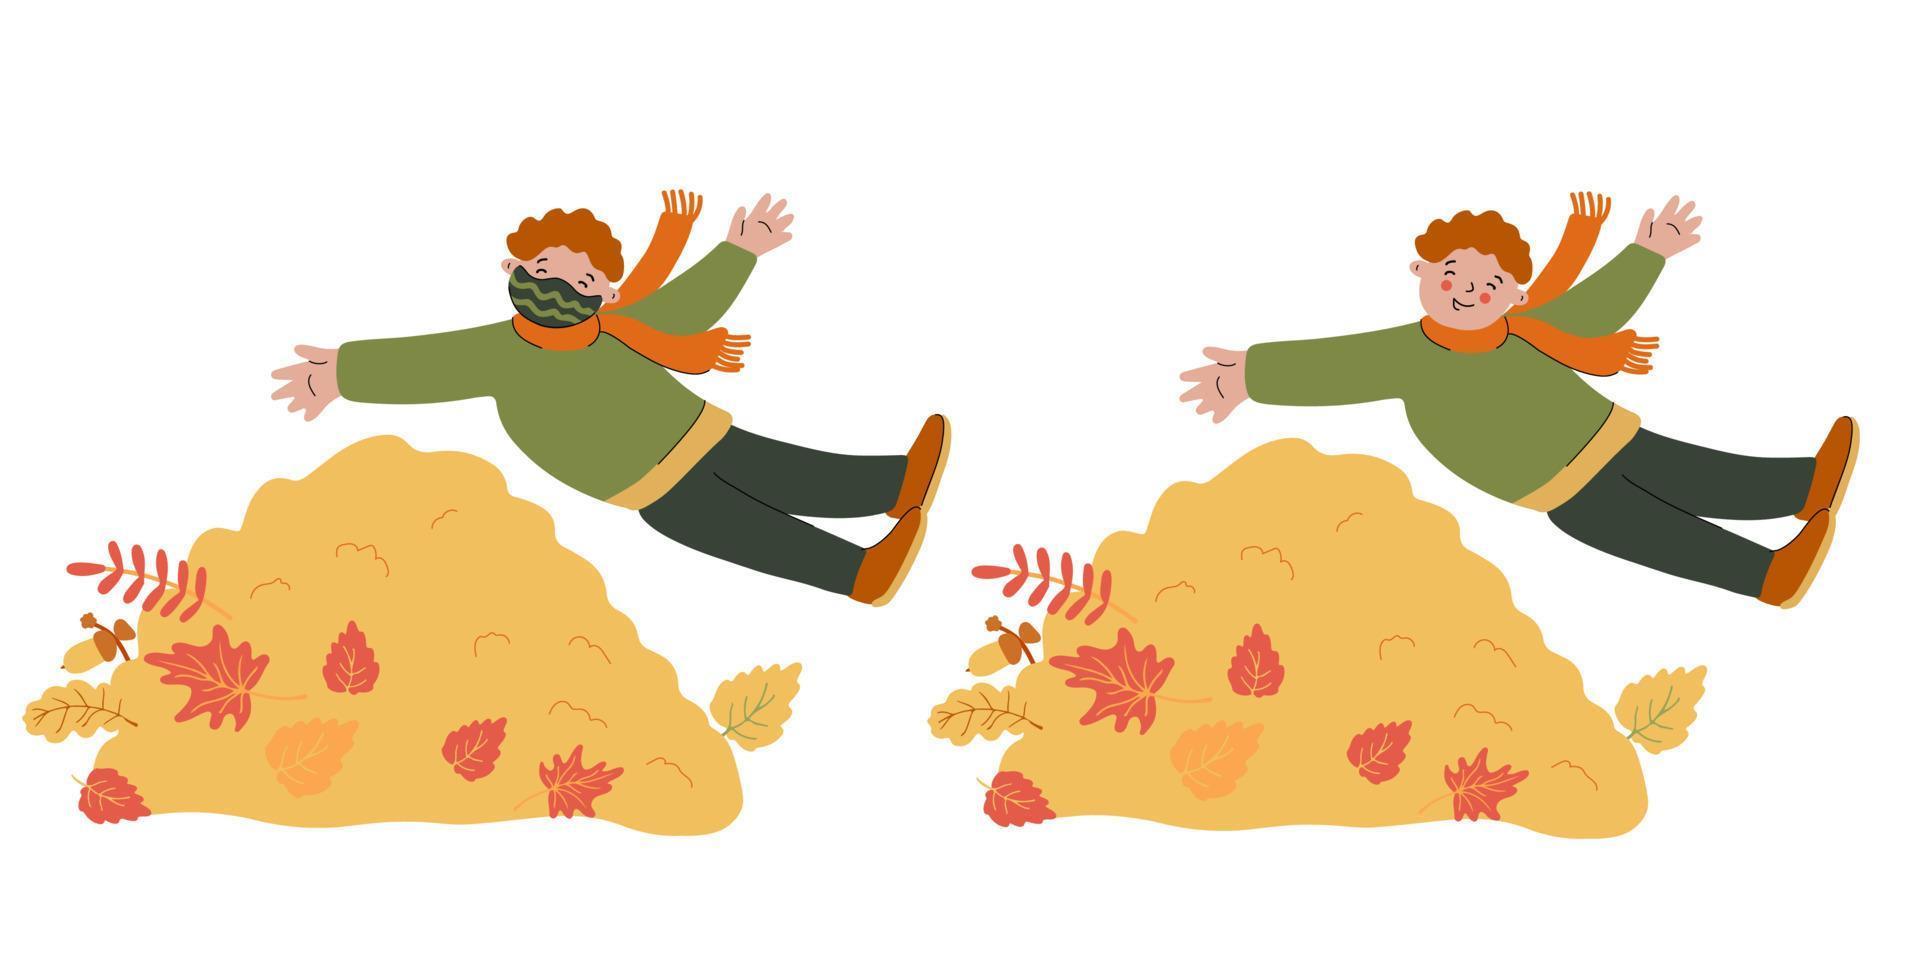 Boy playing with pile of autumn leaves vector